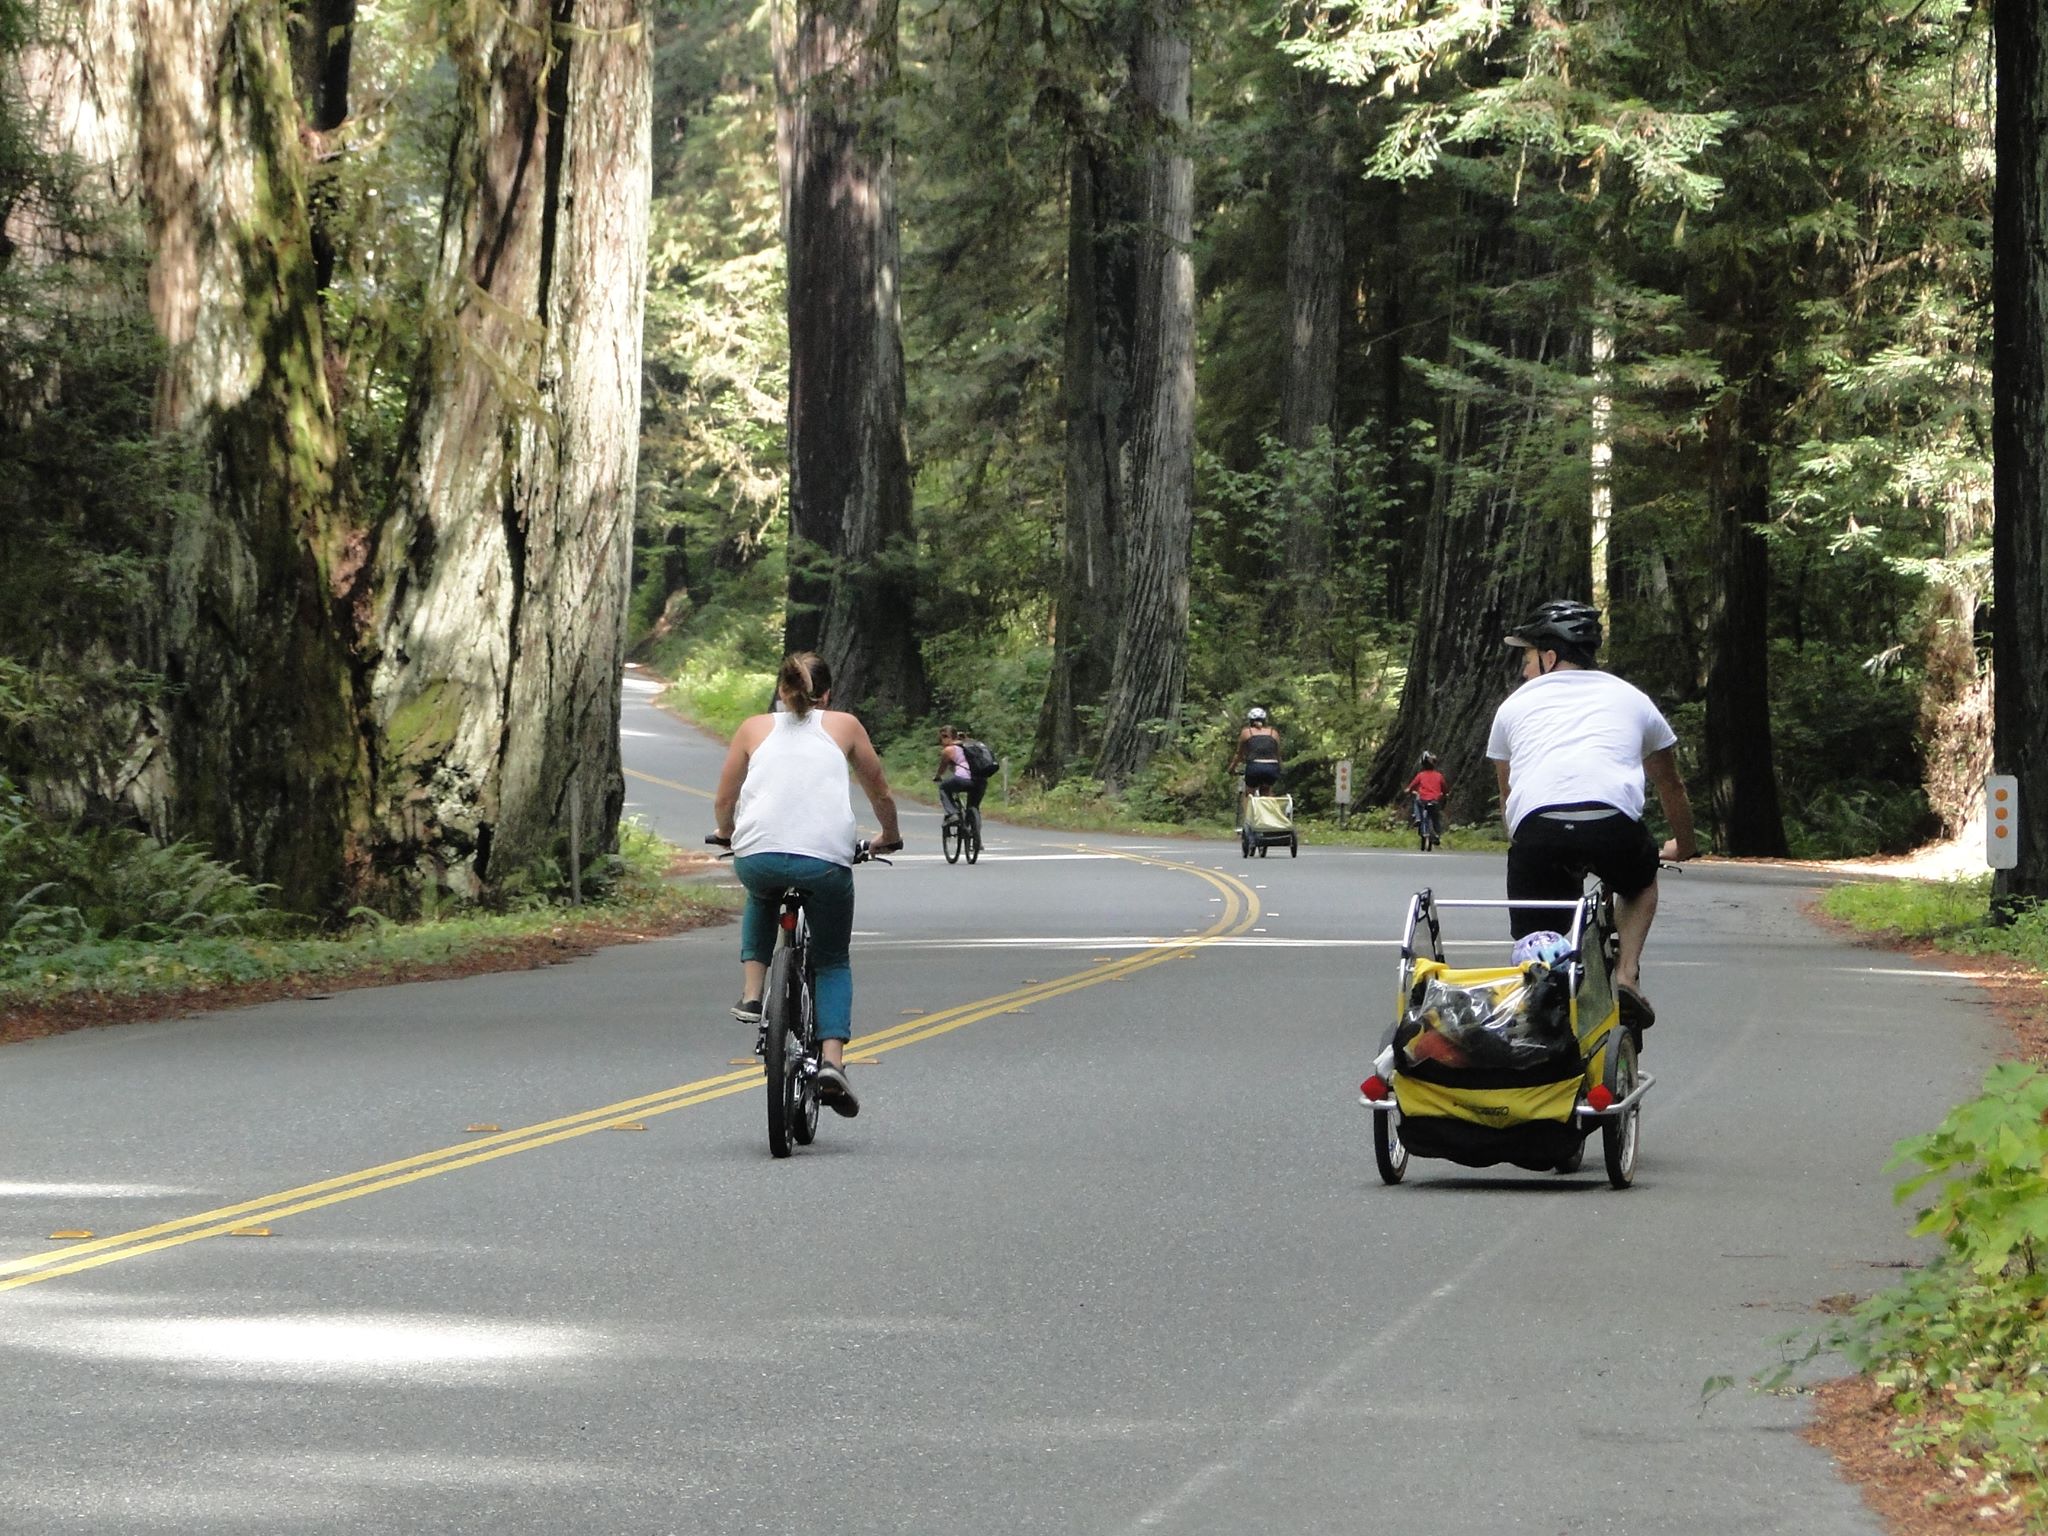 Two adults ride bikes on a road lined with redwood trees.